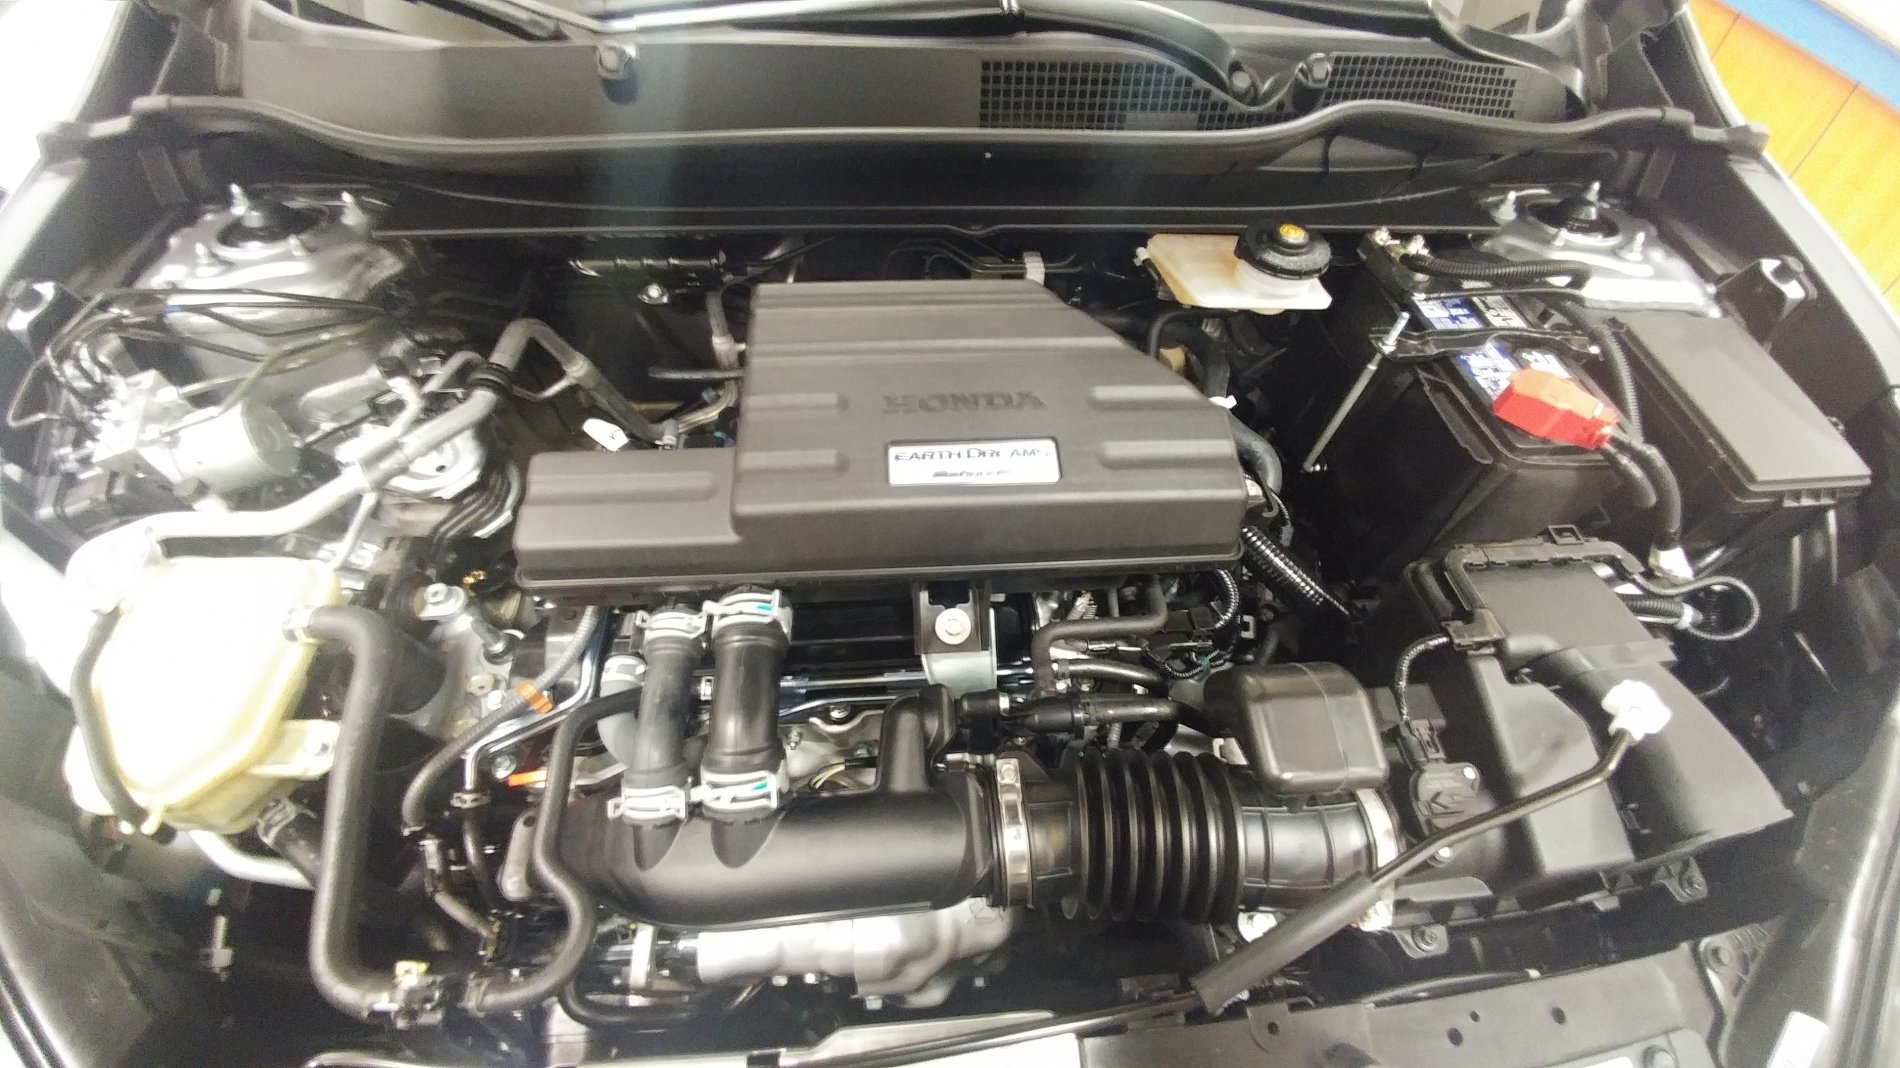 Crv motor..whats really under the hood as a 1.5l turbo